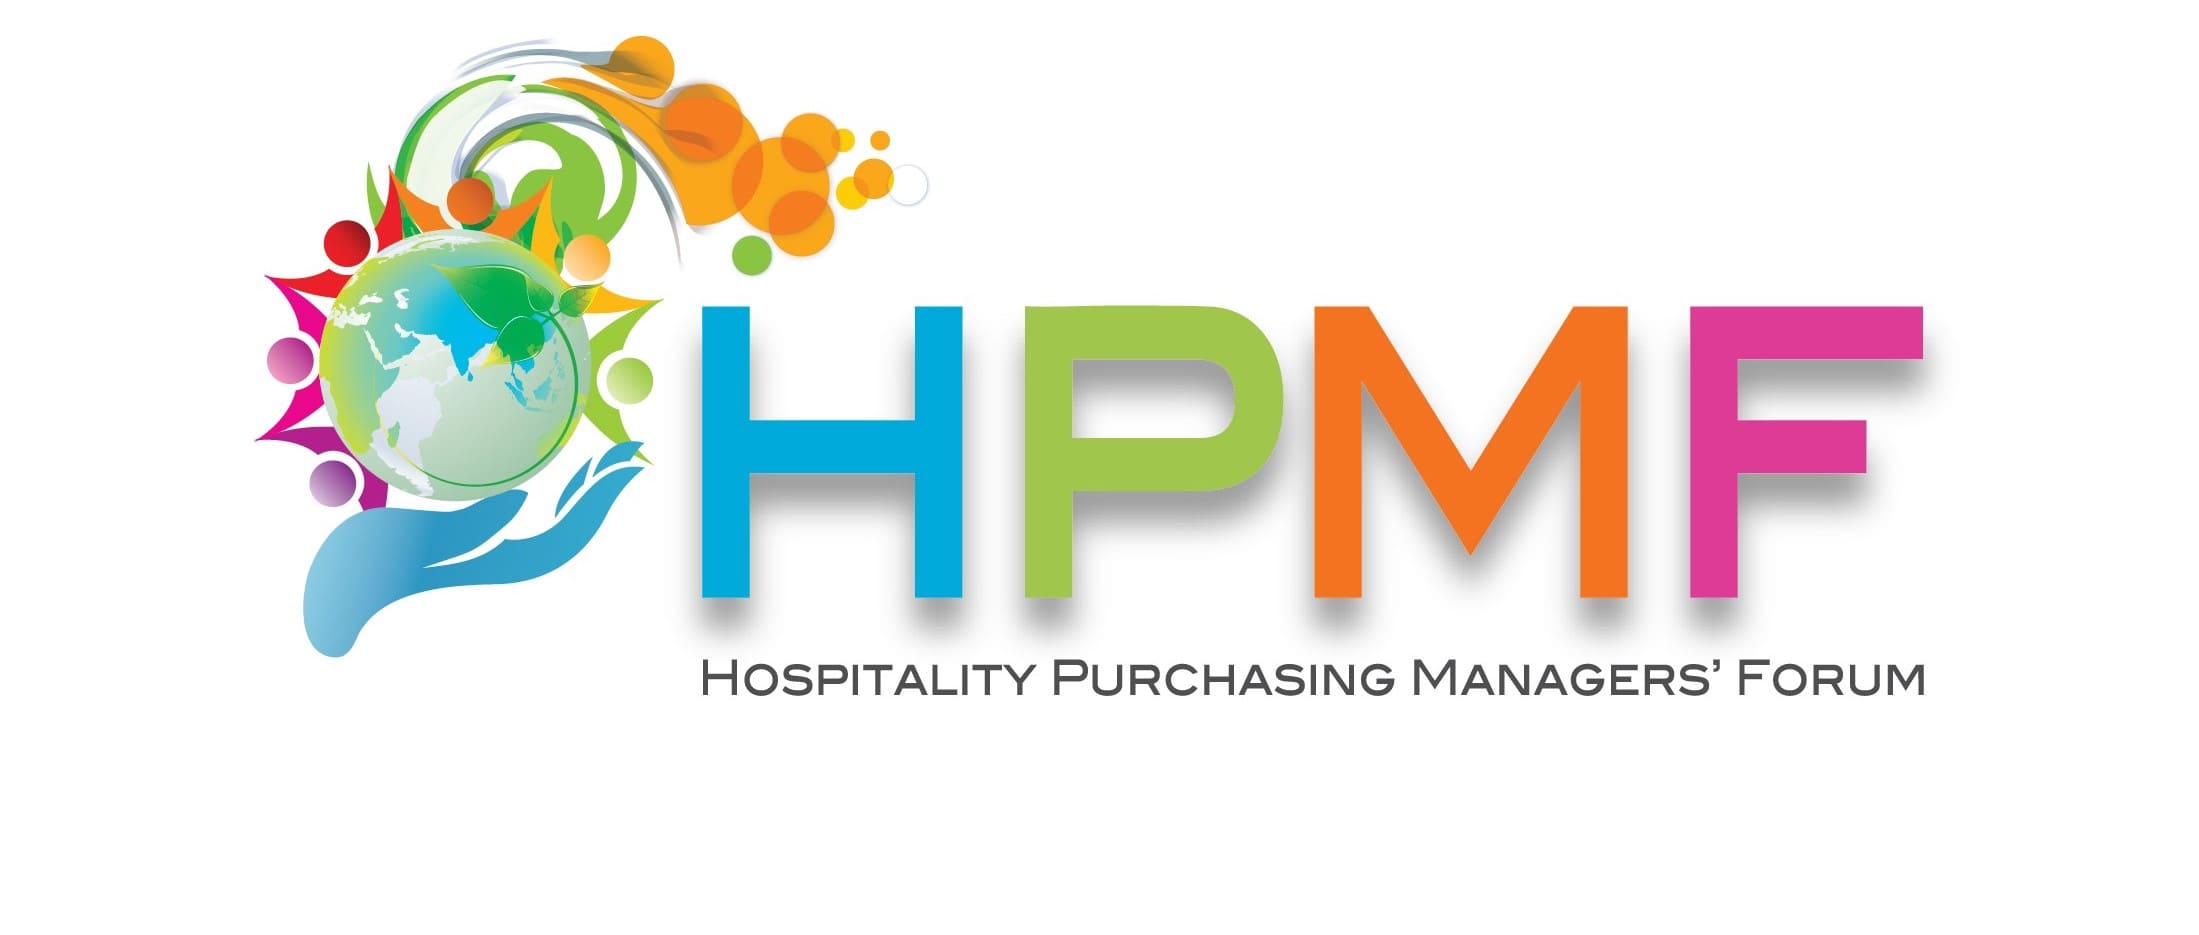 Hospitality Purchasing Managers Forum (HPMF)